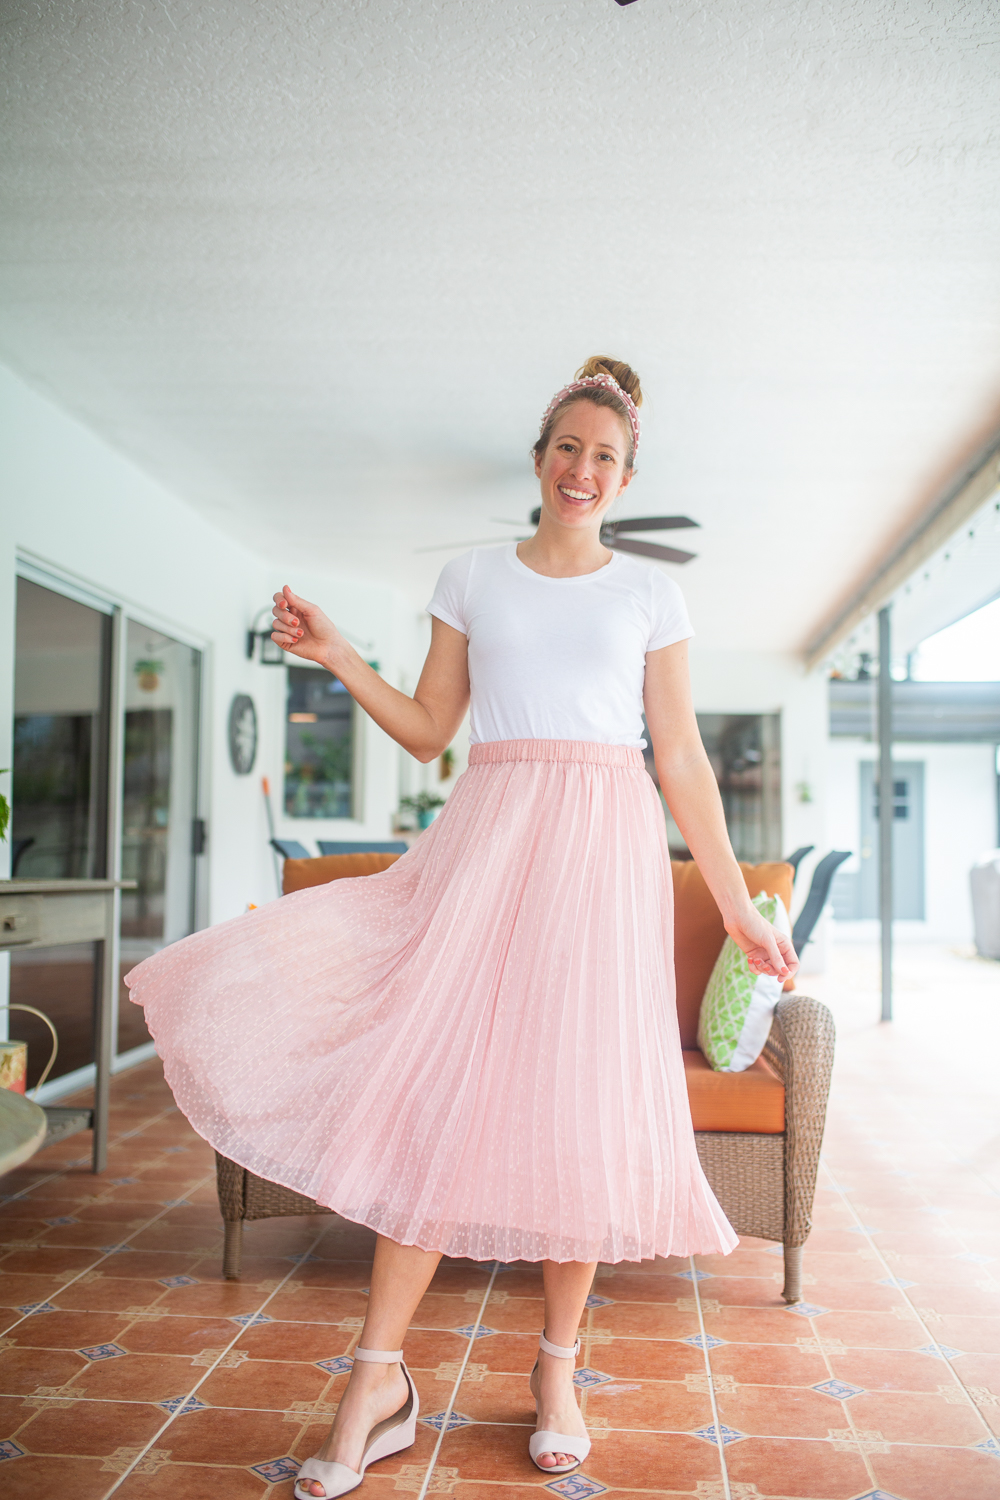 3 Ways to Style a Pleated Skirt / How to Style a Skirt for Spring / Infinitely LOFT Box / How to Wear a Midi Skirt / Casual Spring Outfit / Spring Outfit Inspiration - Sunshine Style, A Florida based Fashion blog by Katie